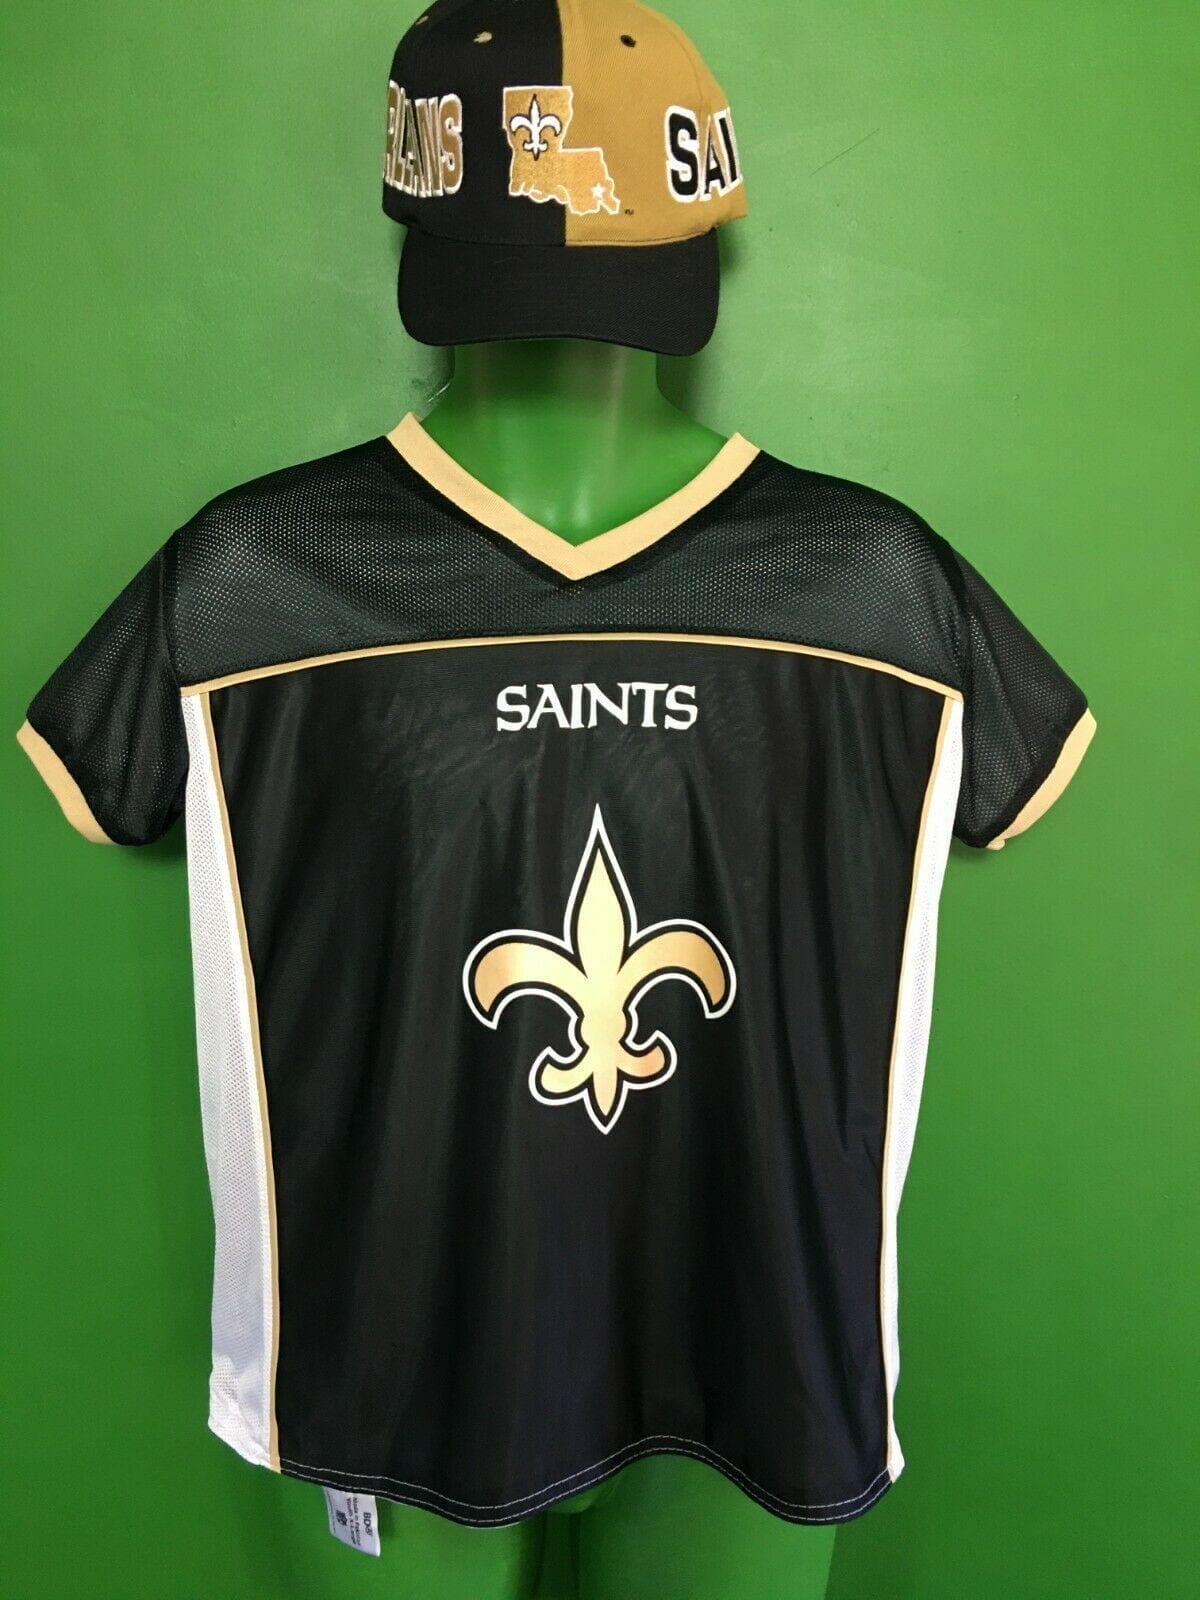 NFL New Orleans Saints Authentic Kids' Flag Football Jersey Youth X-Large 18-20